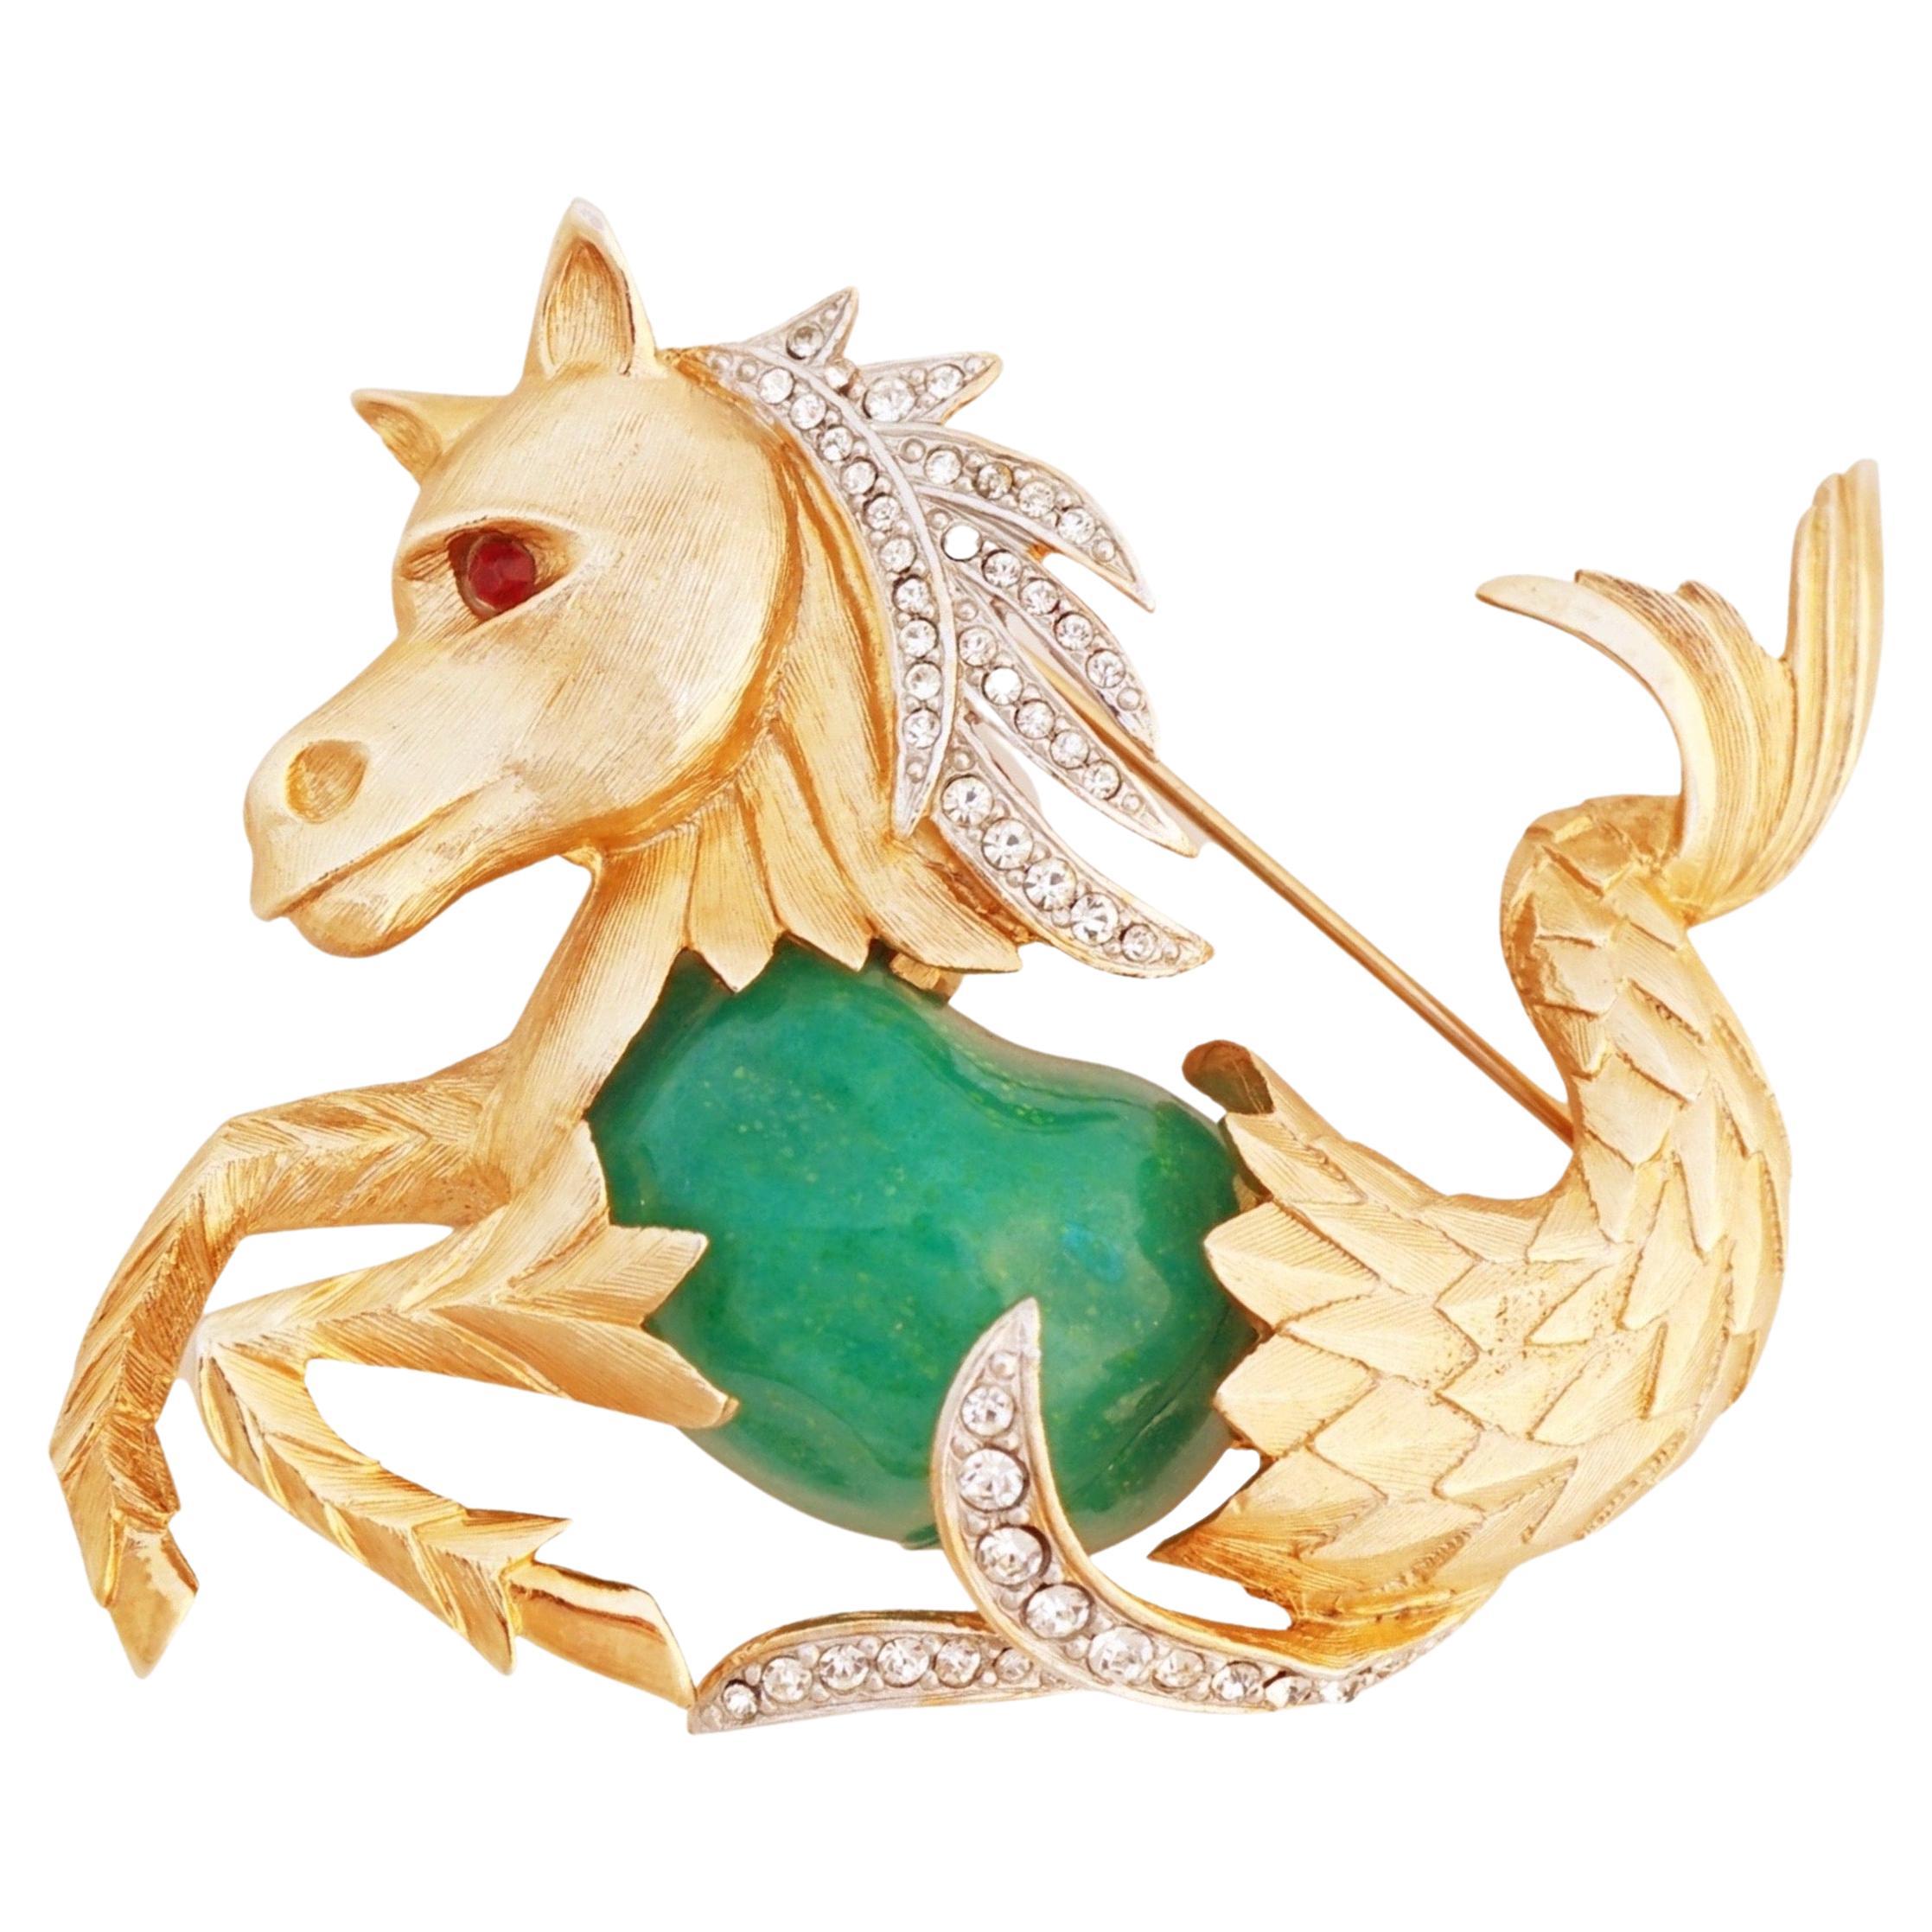 Gilded Mythical Merhorse Figural Brooch With Faux Jade Belly By Kramer, 1950s For Sale